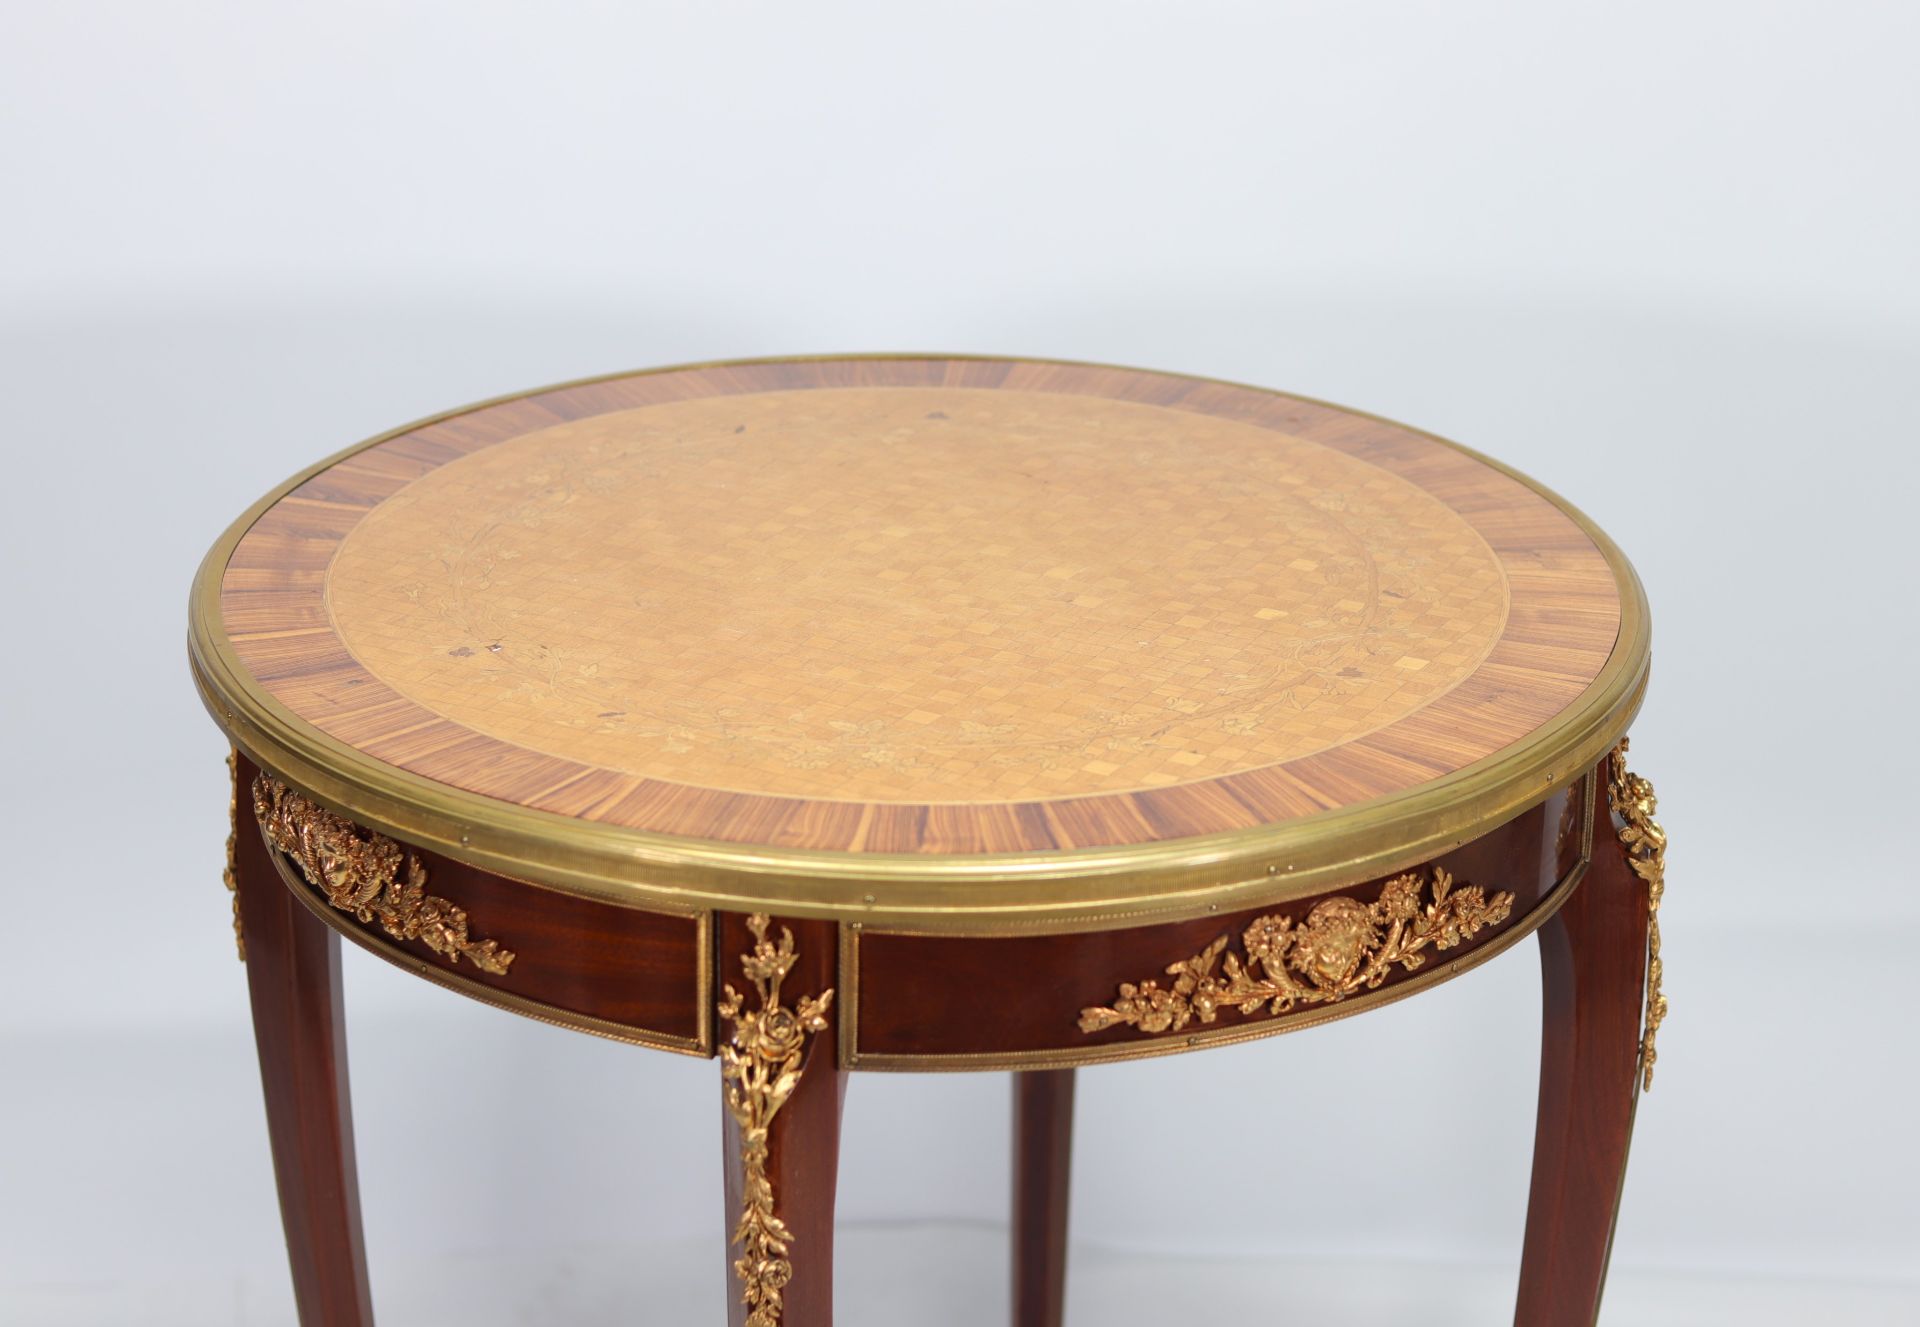 Small marquetry and ormolu pedestal table in the style of Adam WEISWEILER (1744-1820) - Image 4 of 4